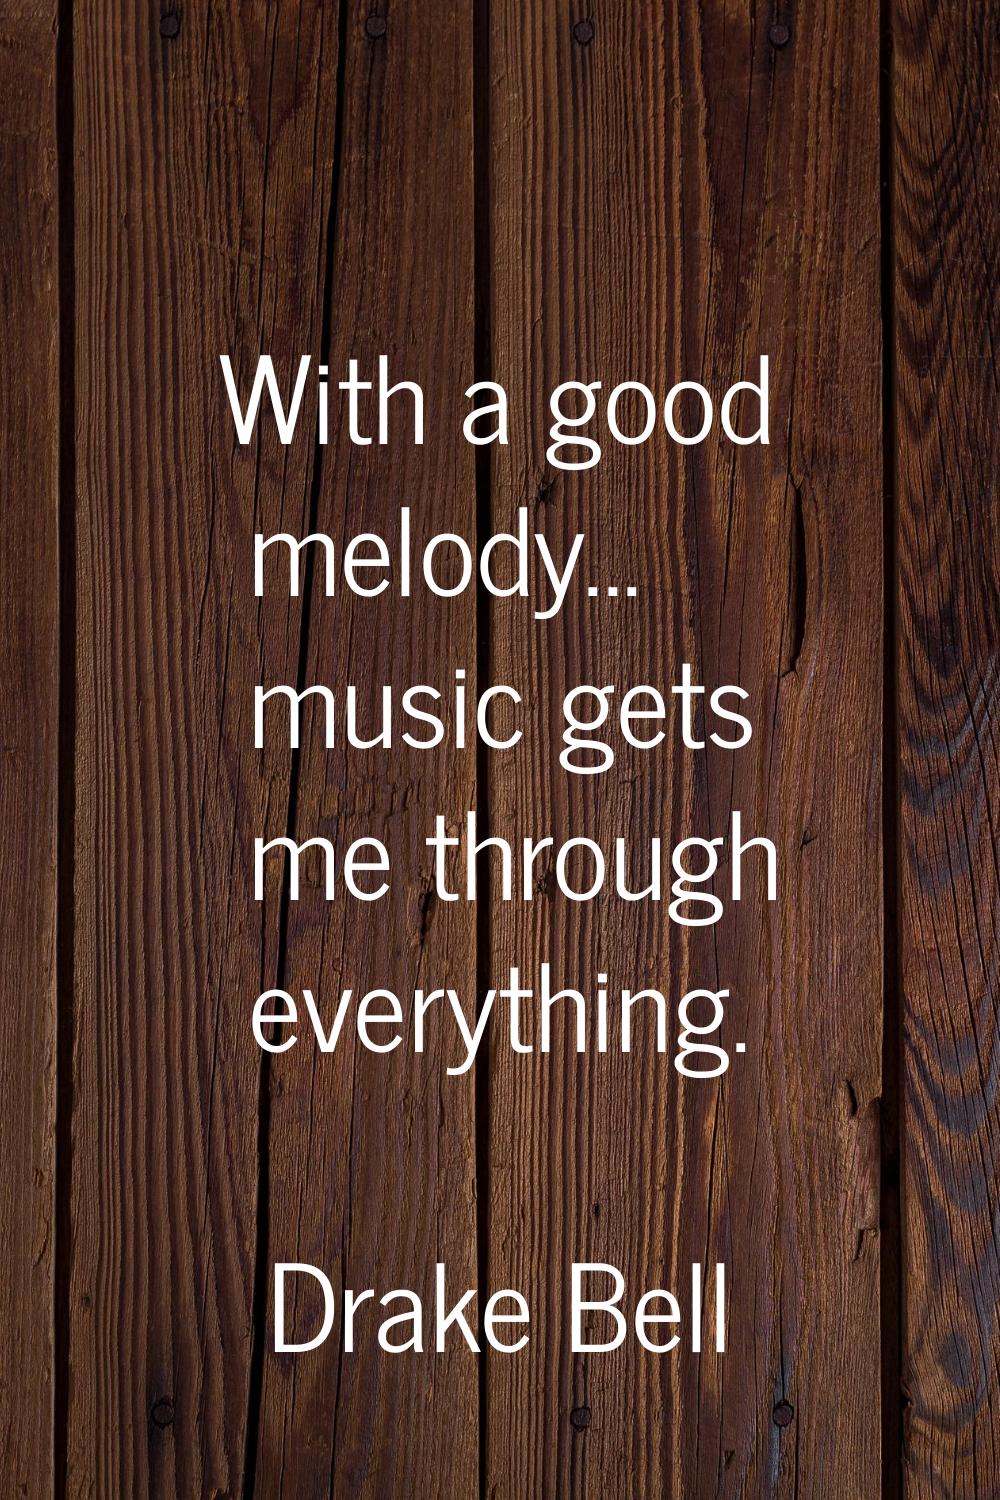 With a good melody... music gets me through everything.